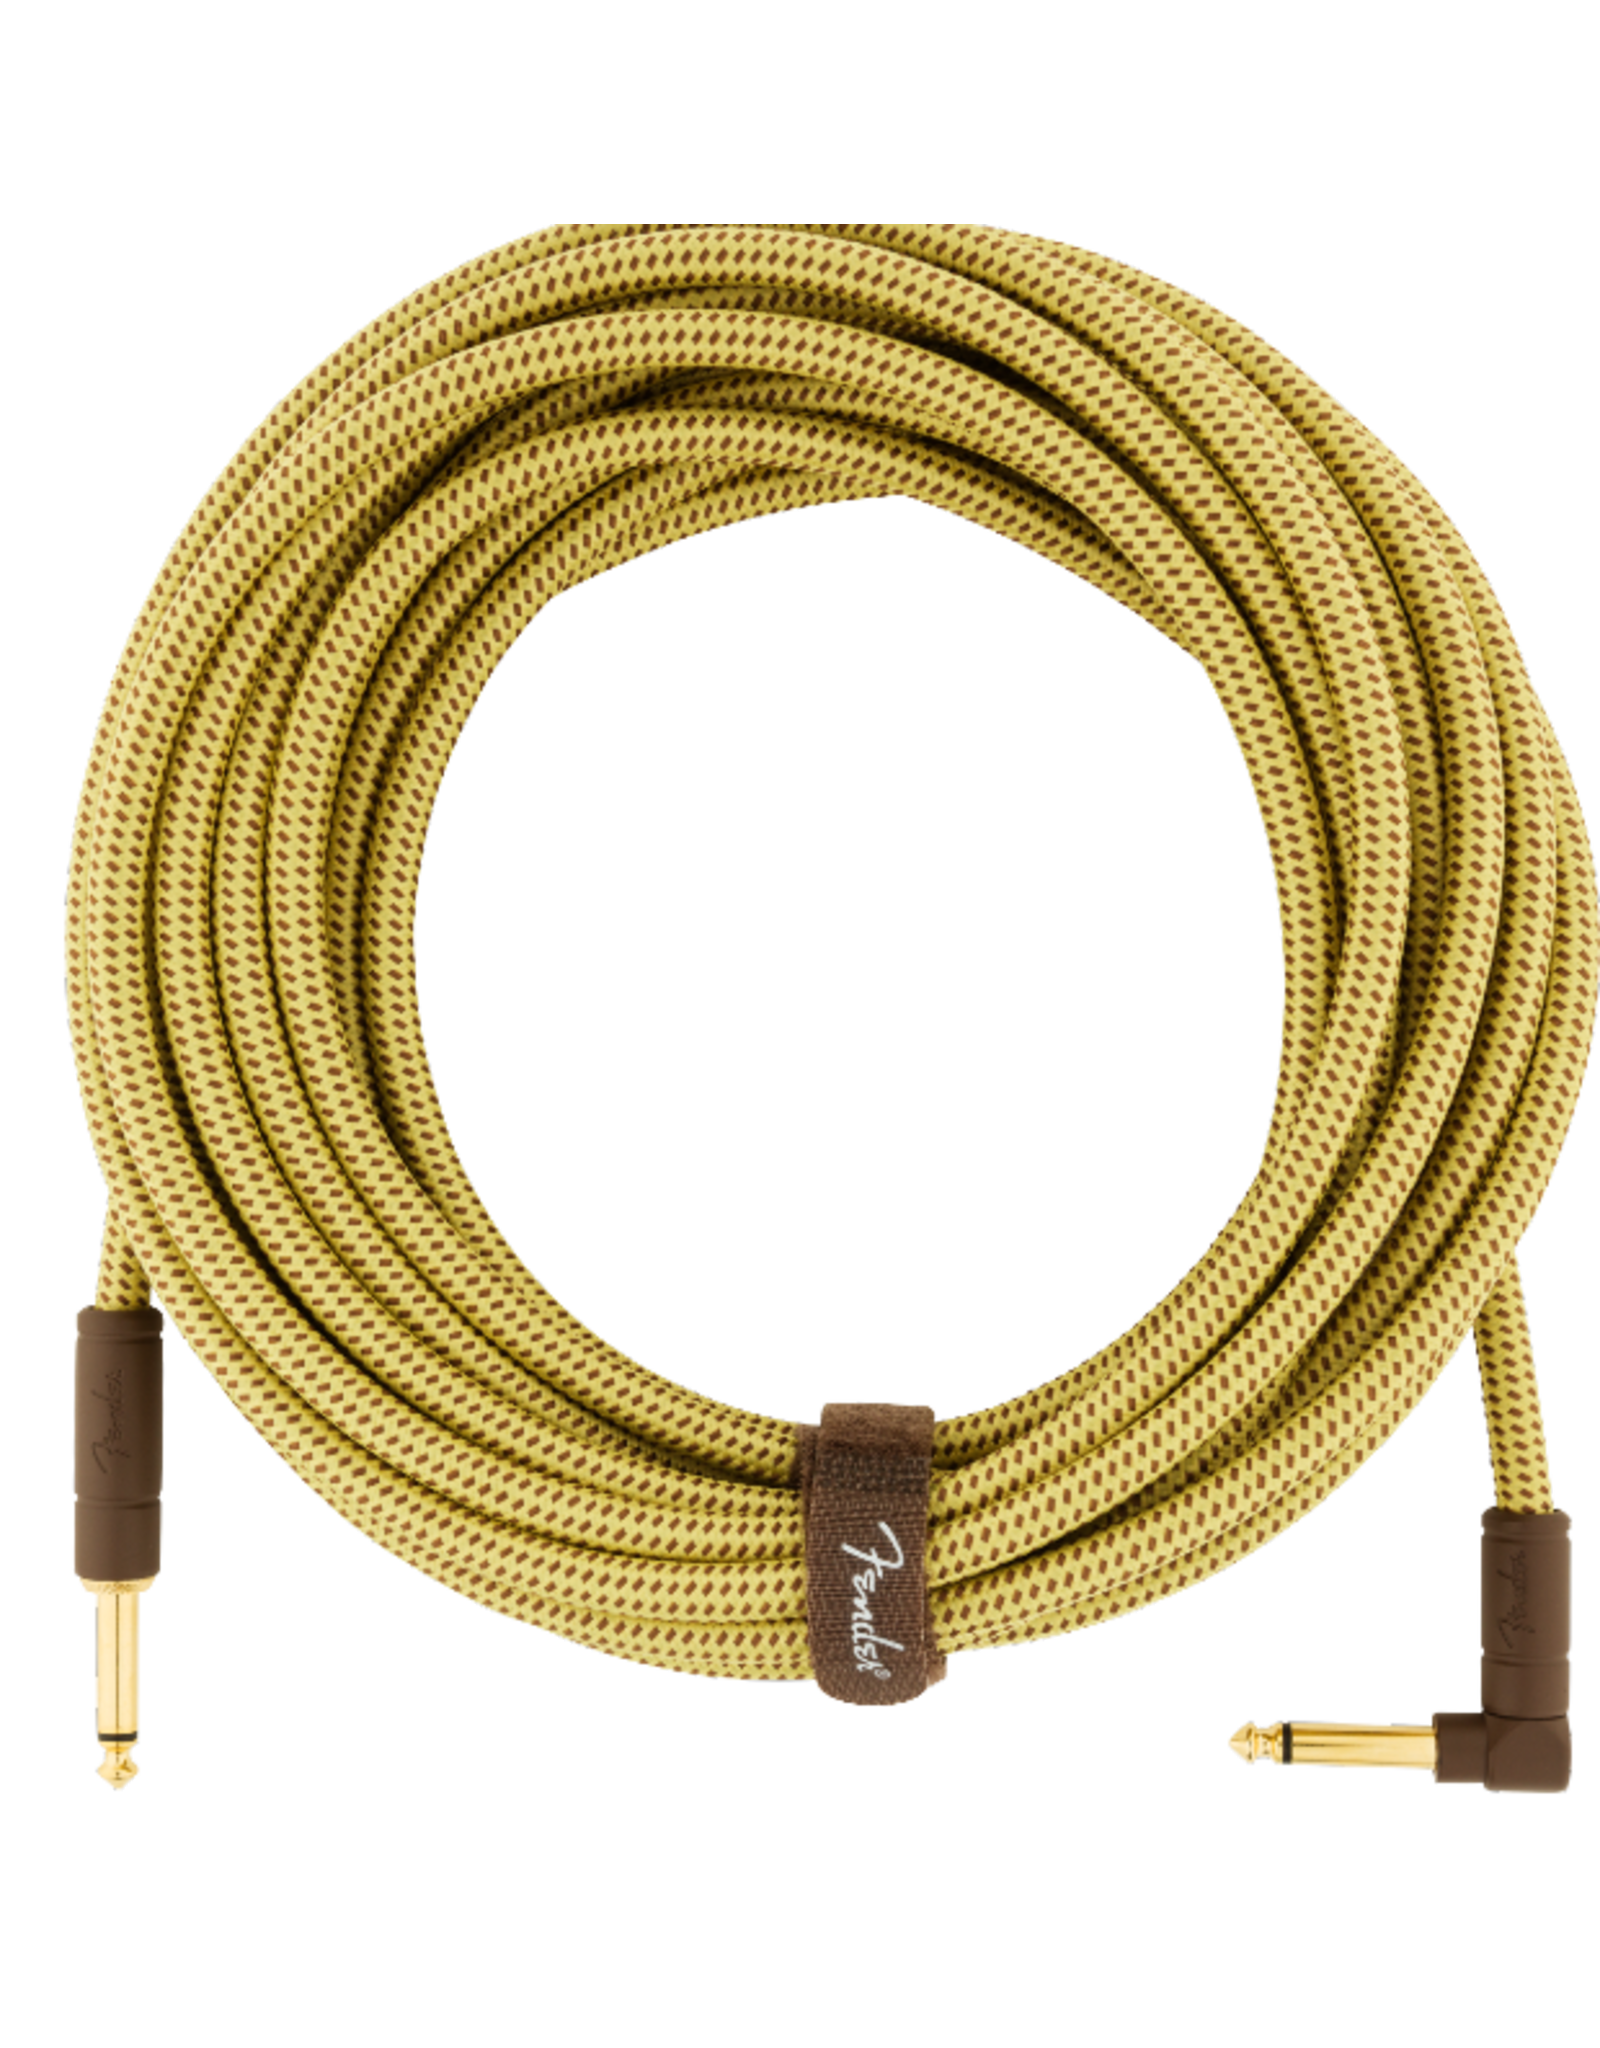 Fender Fender Deluxe Series Instrument Cable, Straight/Angle, 25', Tweed